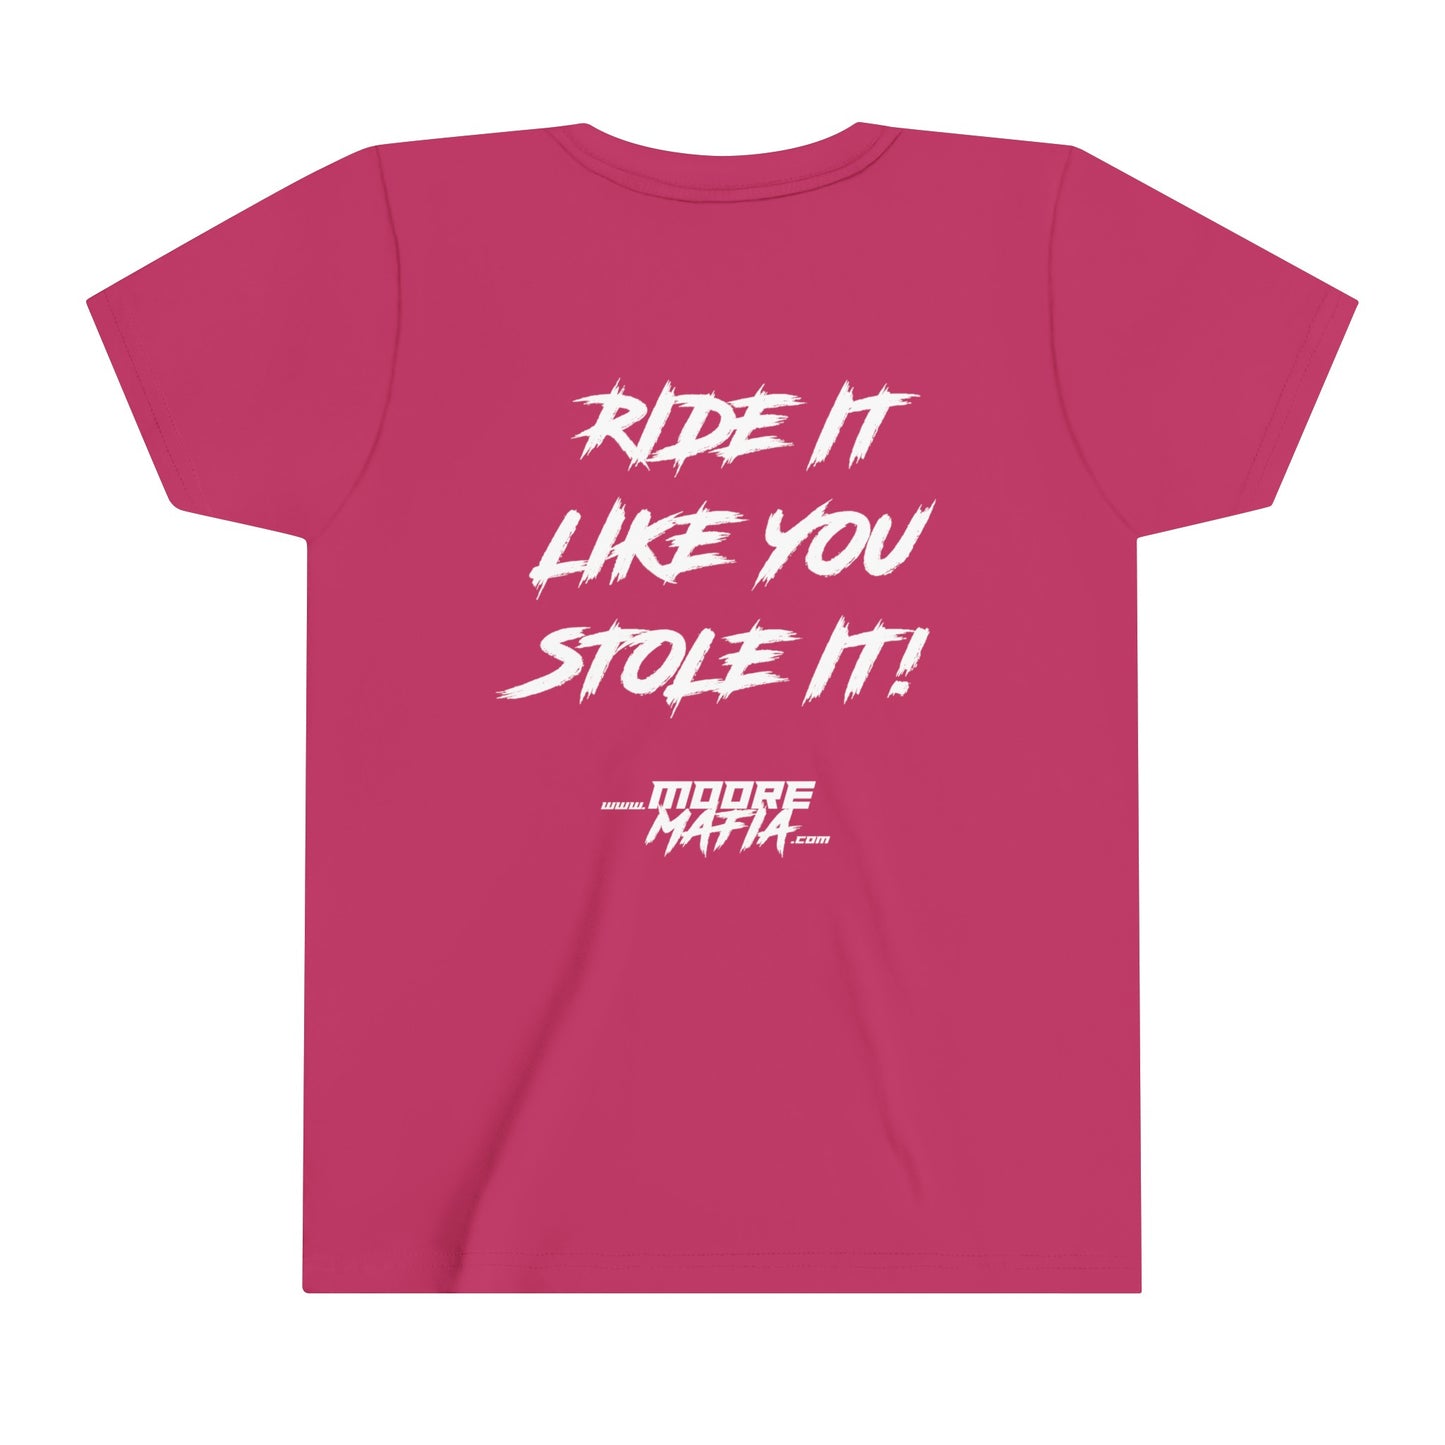 Ride It Like You Stole It Youth Short Sleeve T-Shirt